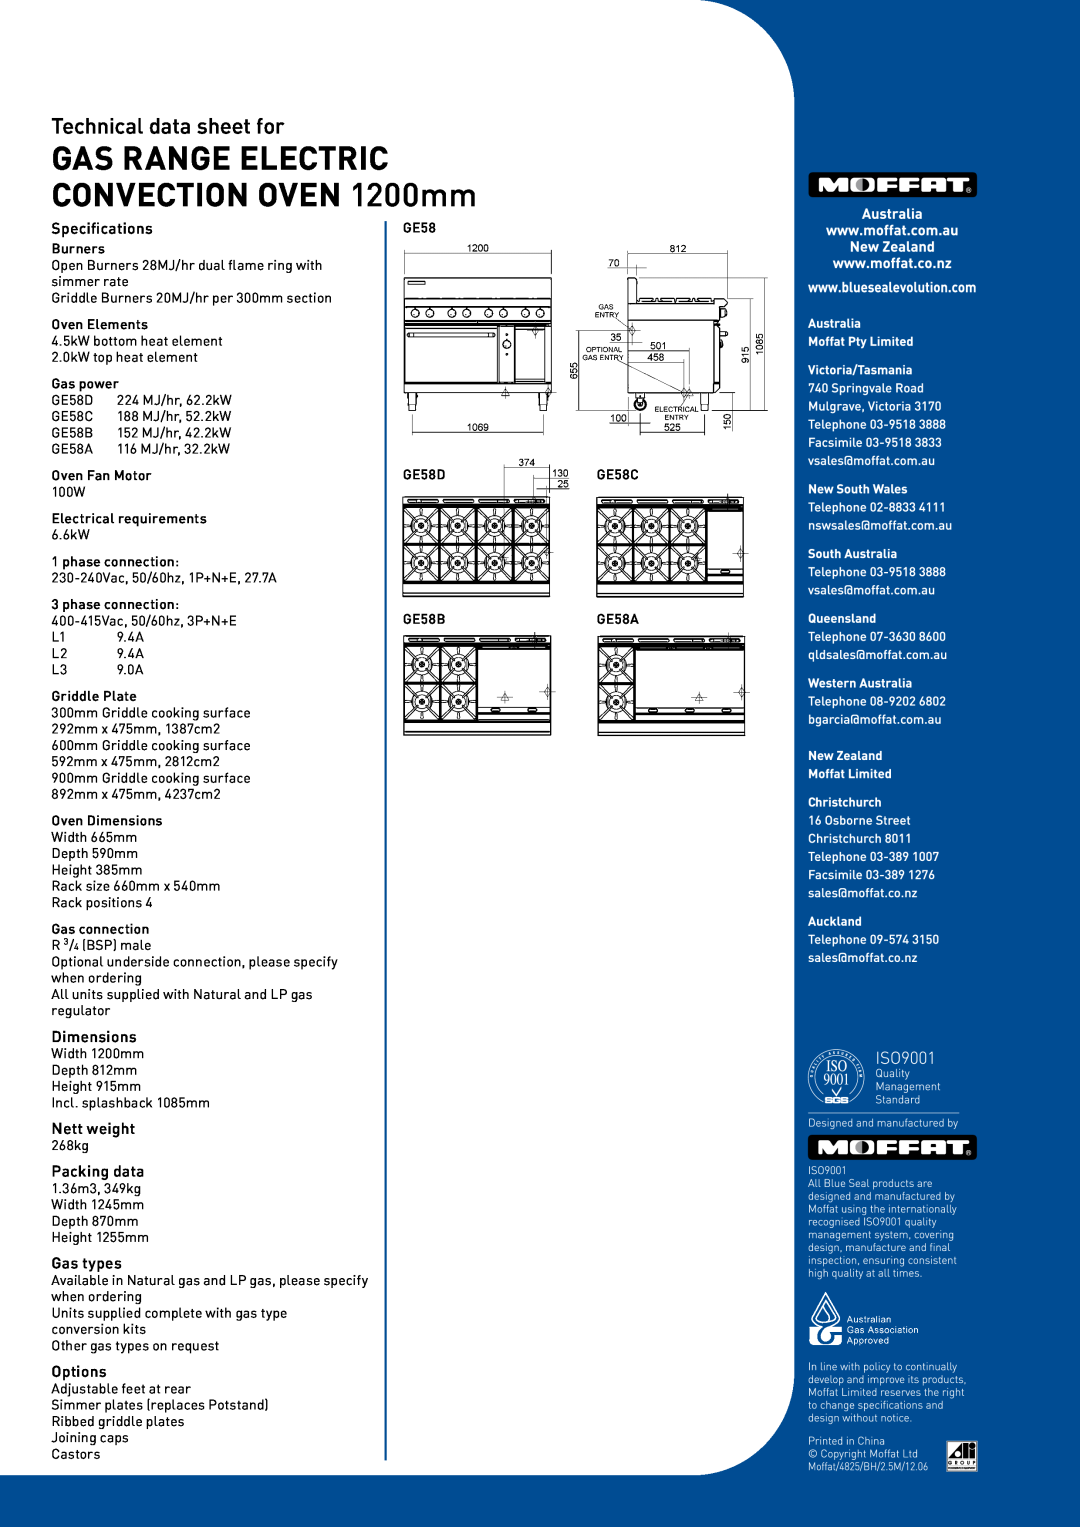 Moffat GE58B, GE58C Specifications, Dimensions, Nett weight, Packing data, Gas types, Options, Technical data sheet for 